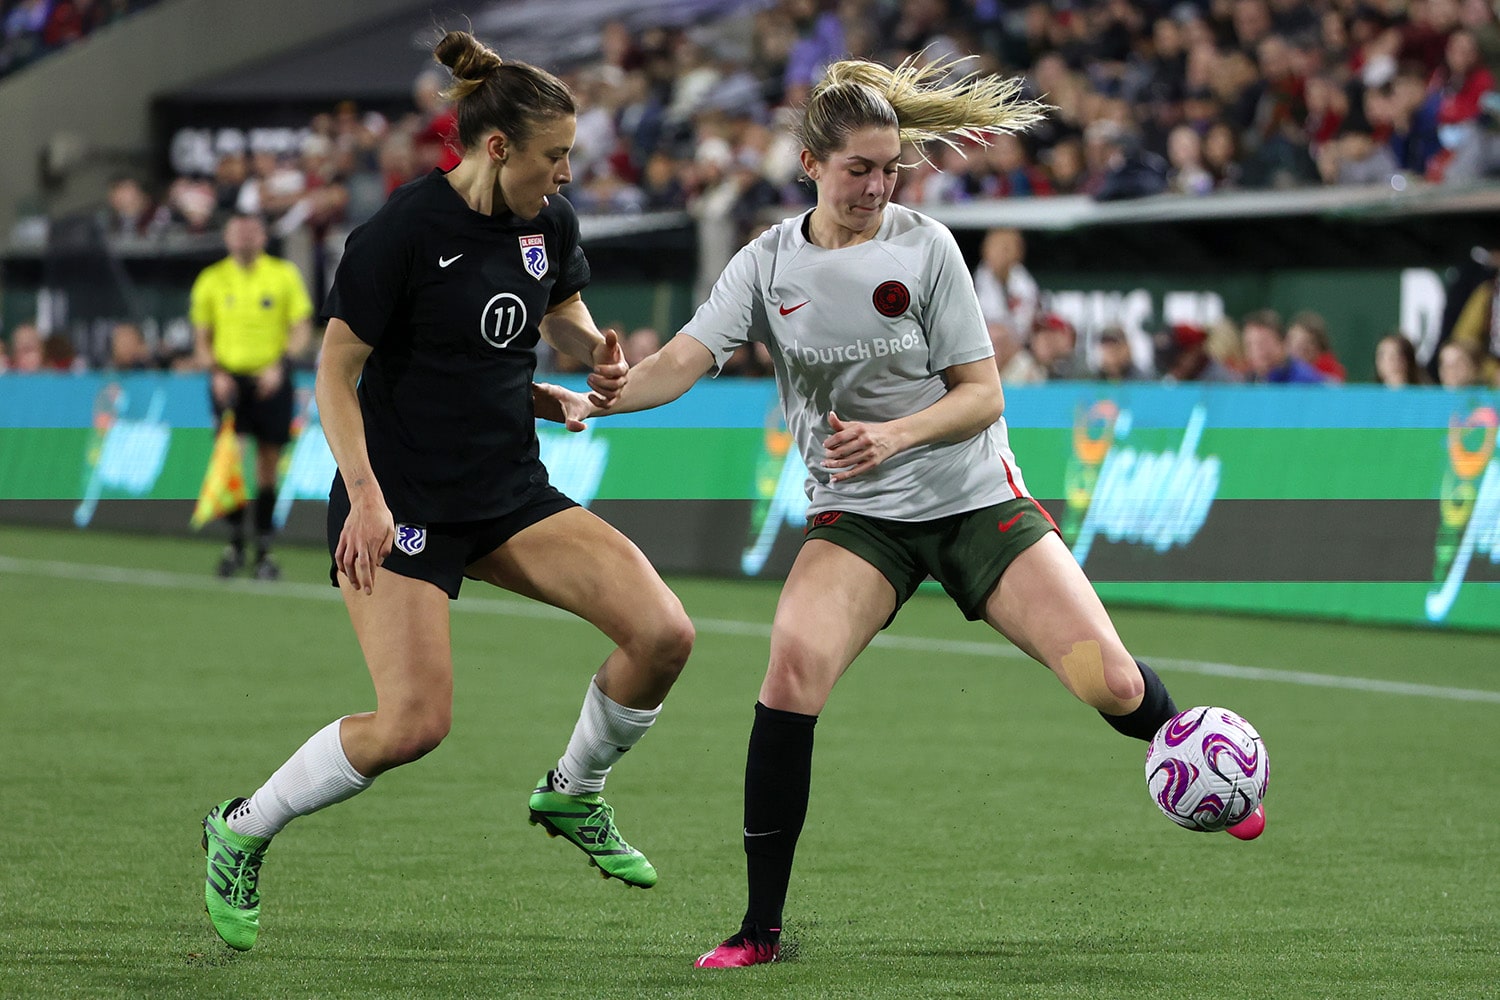 Endeavor to Stream NWSL Games Overseas for Free